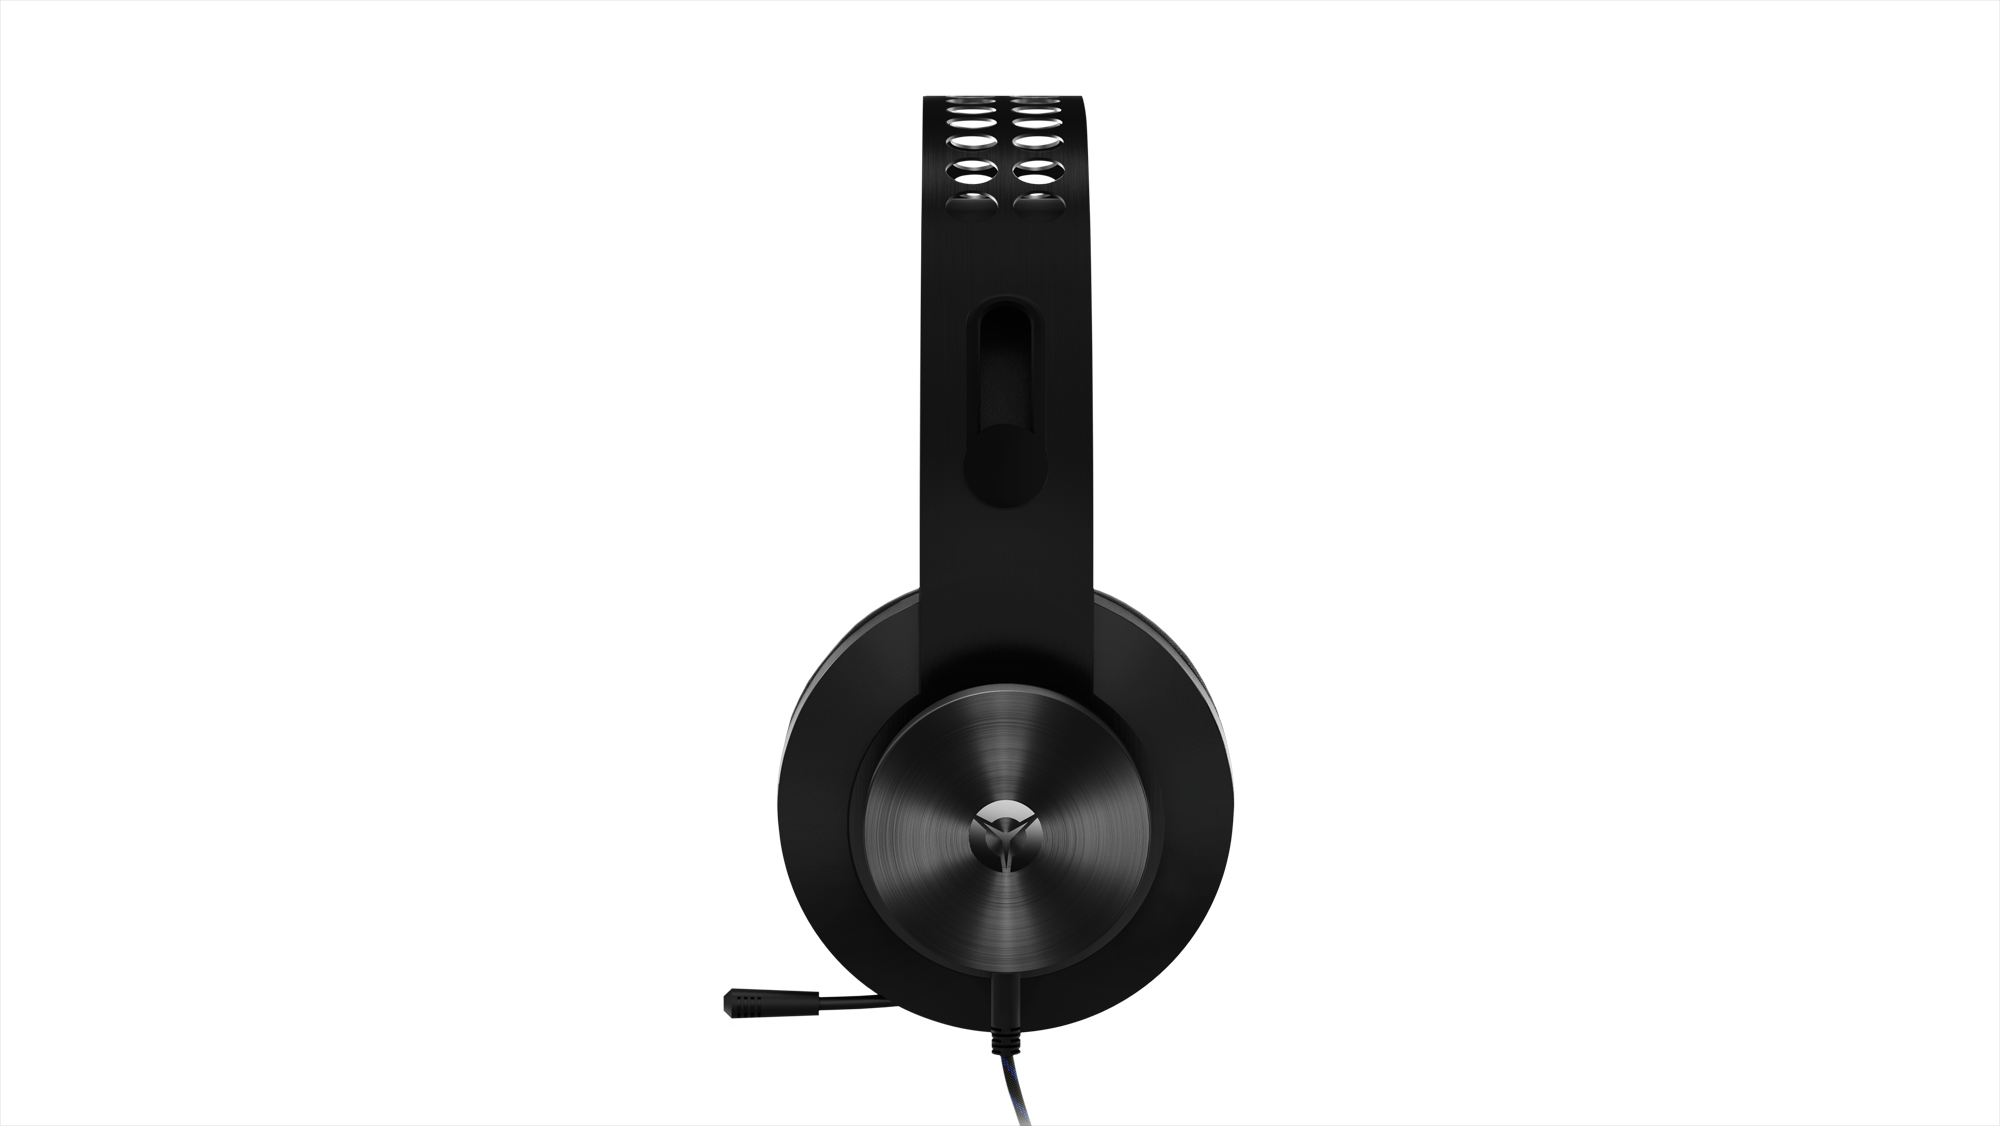 lenovo announce new legion gaming peripherals ces 2019 06 h300 light weight  comfort